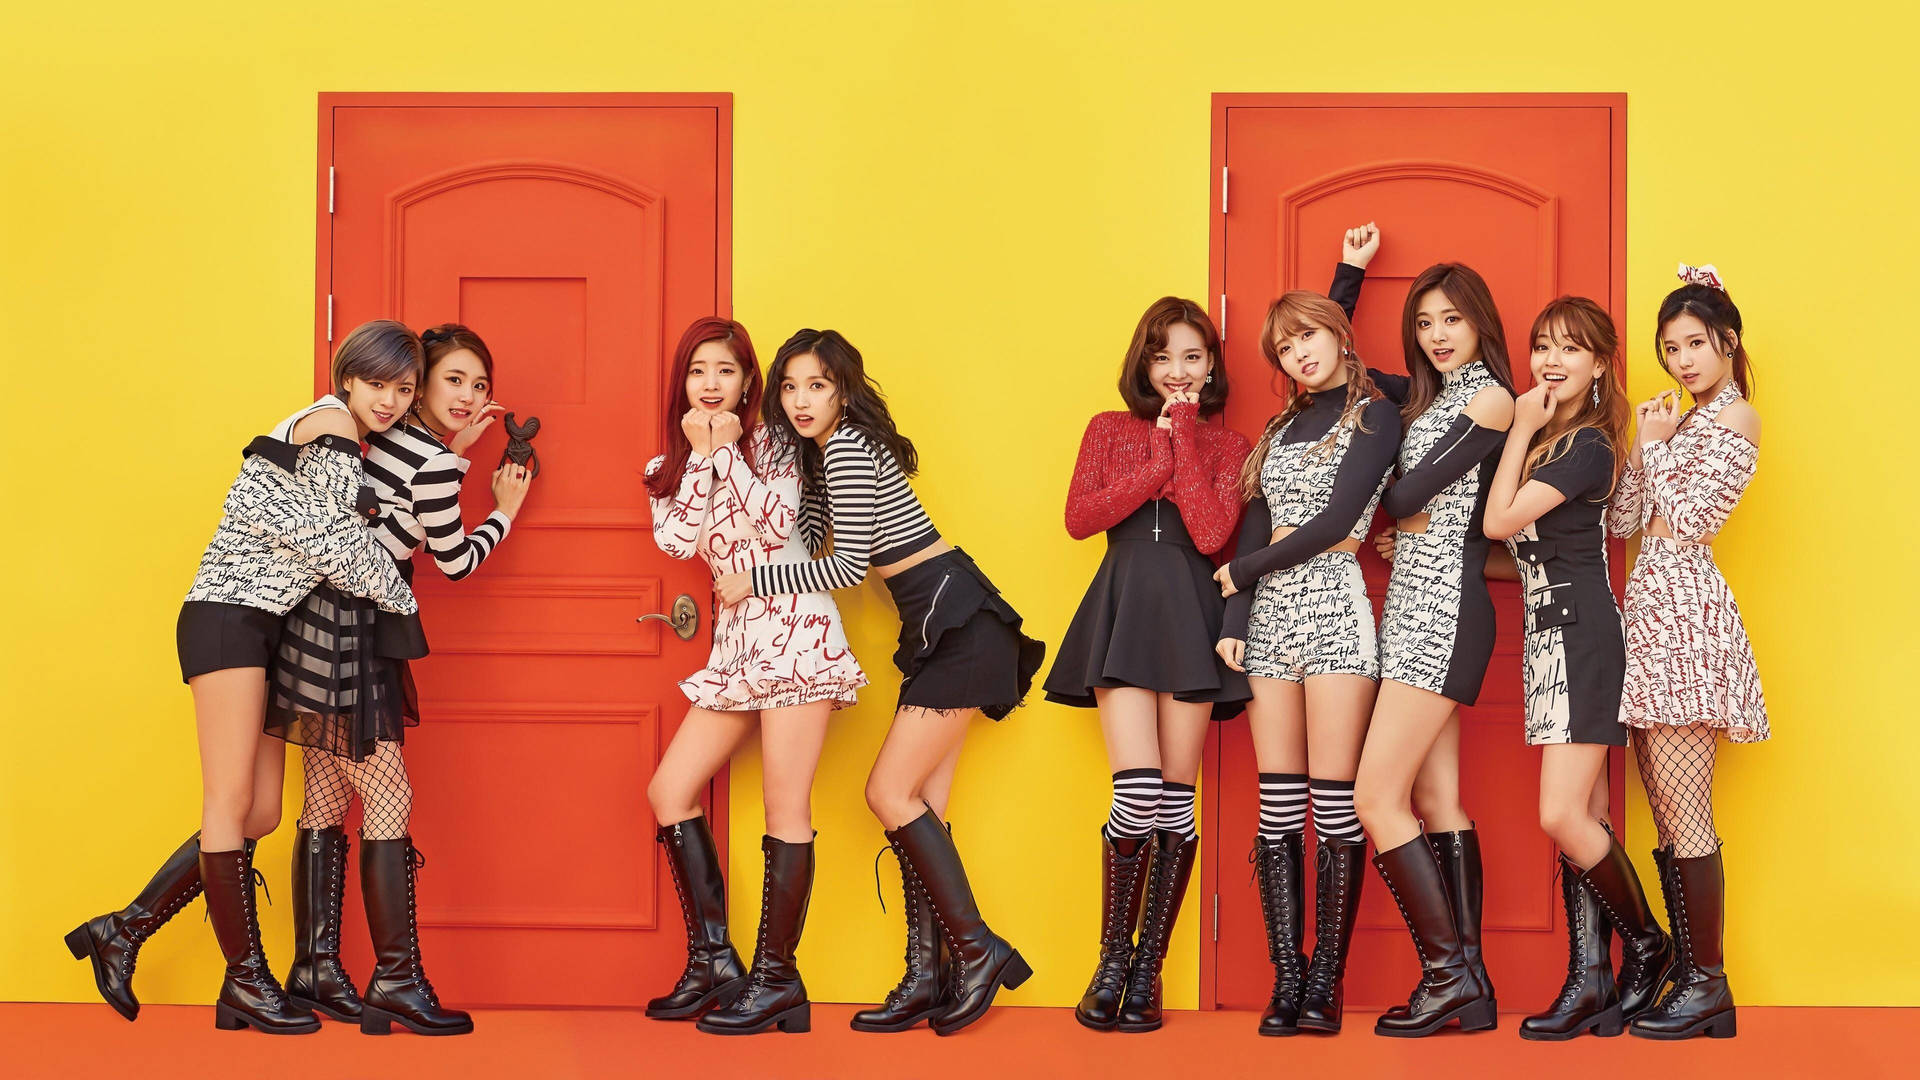 Feel the summer vibe with Twice’s new music video, Knock Knock Wallpaper